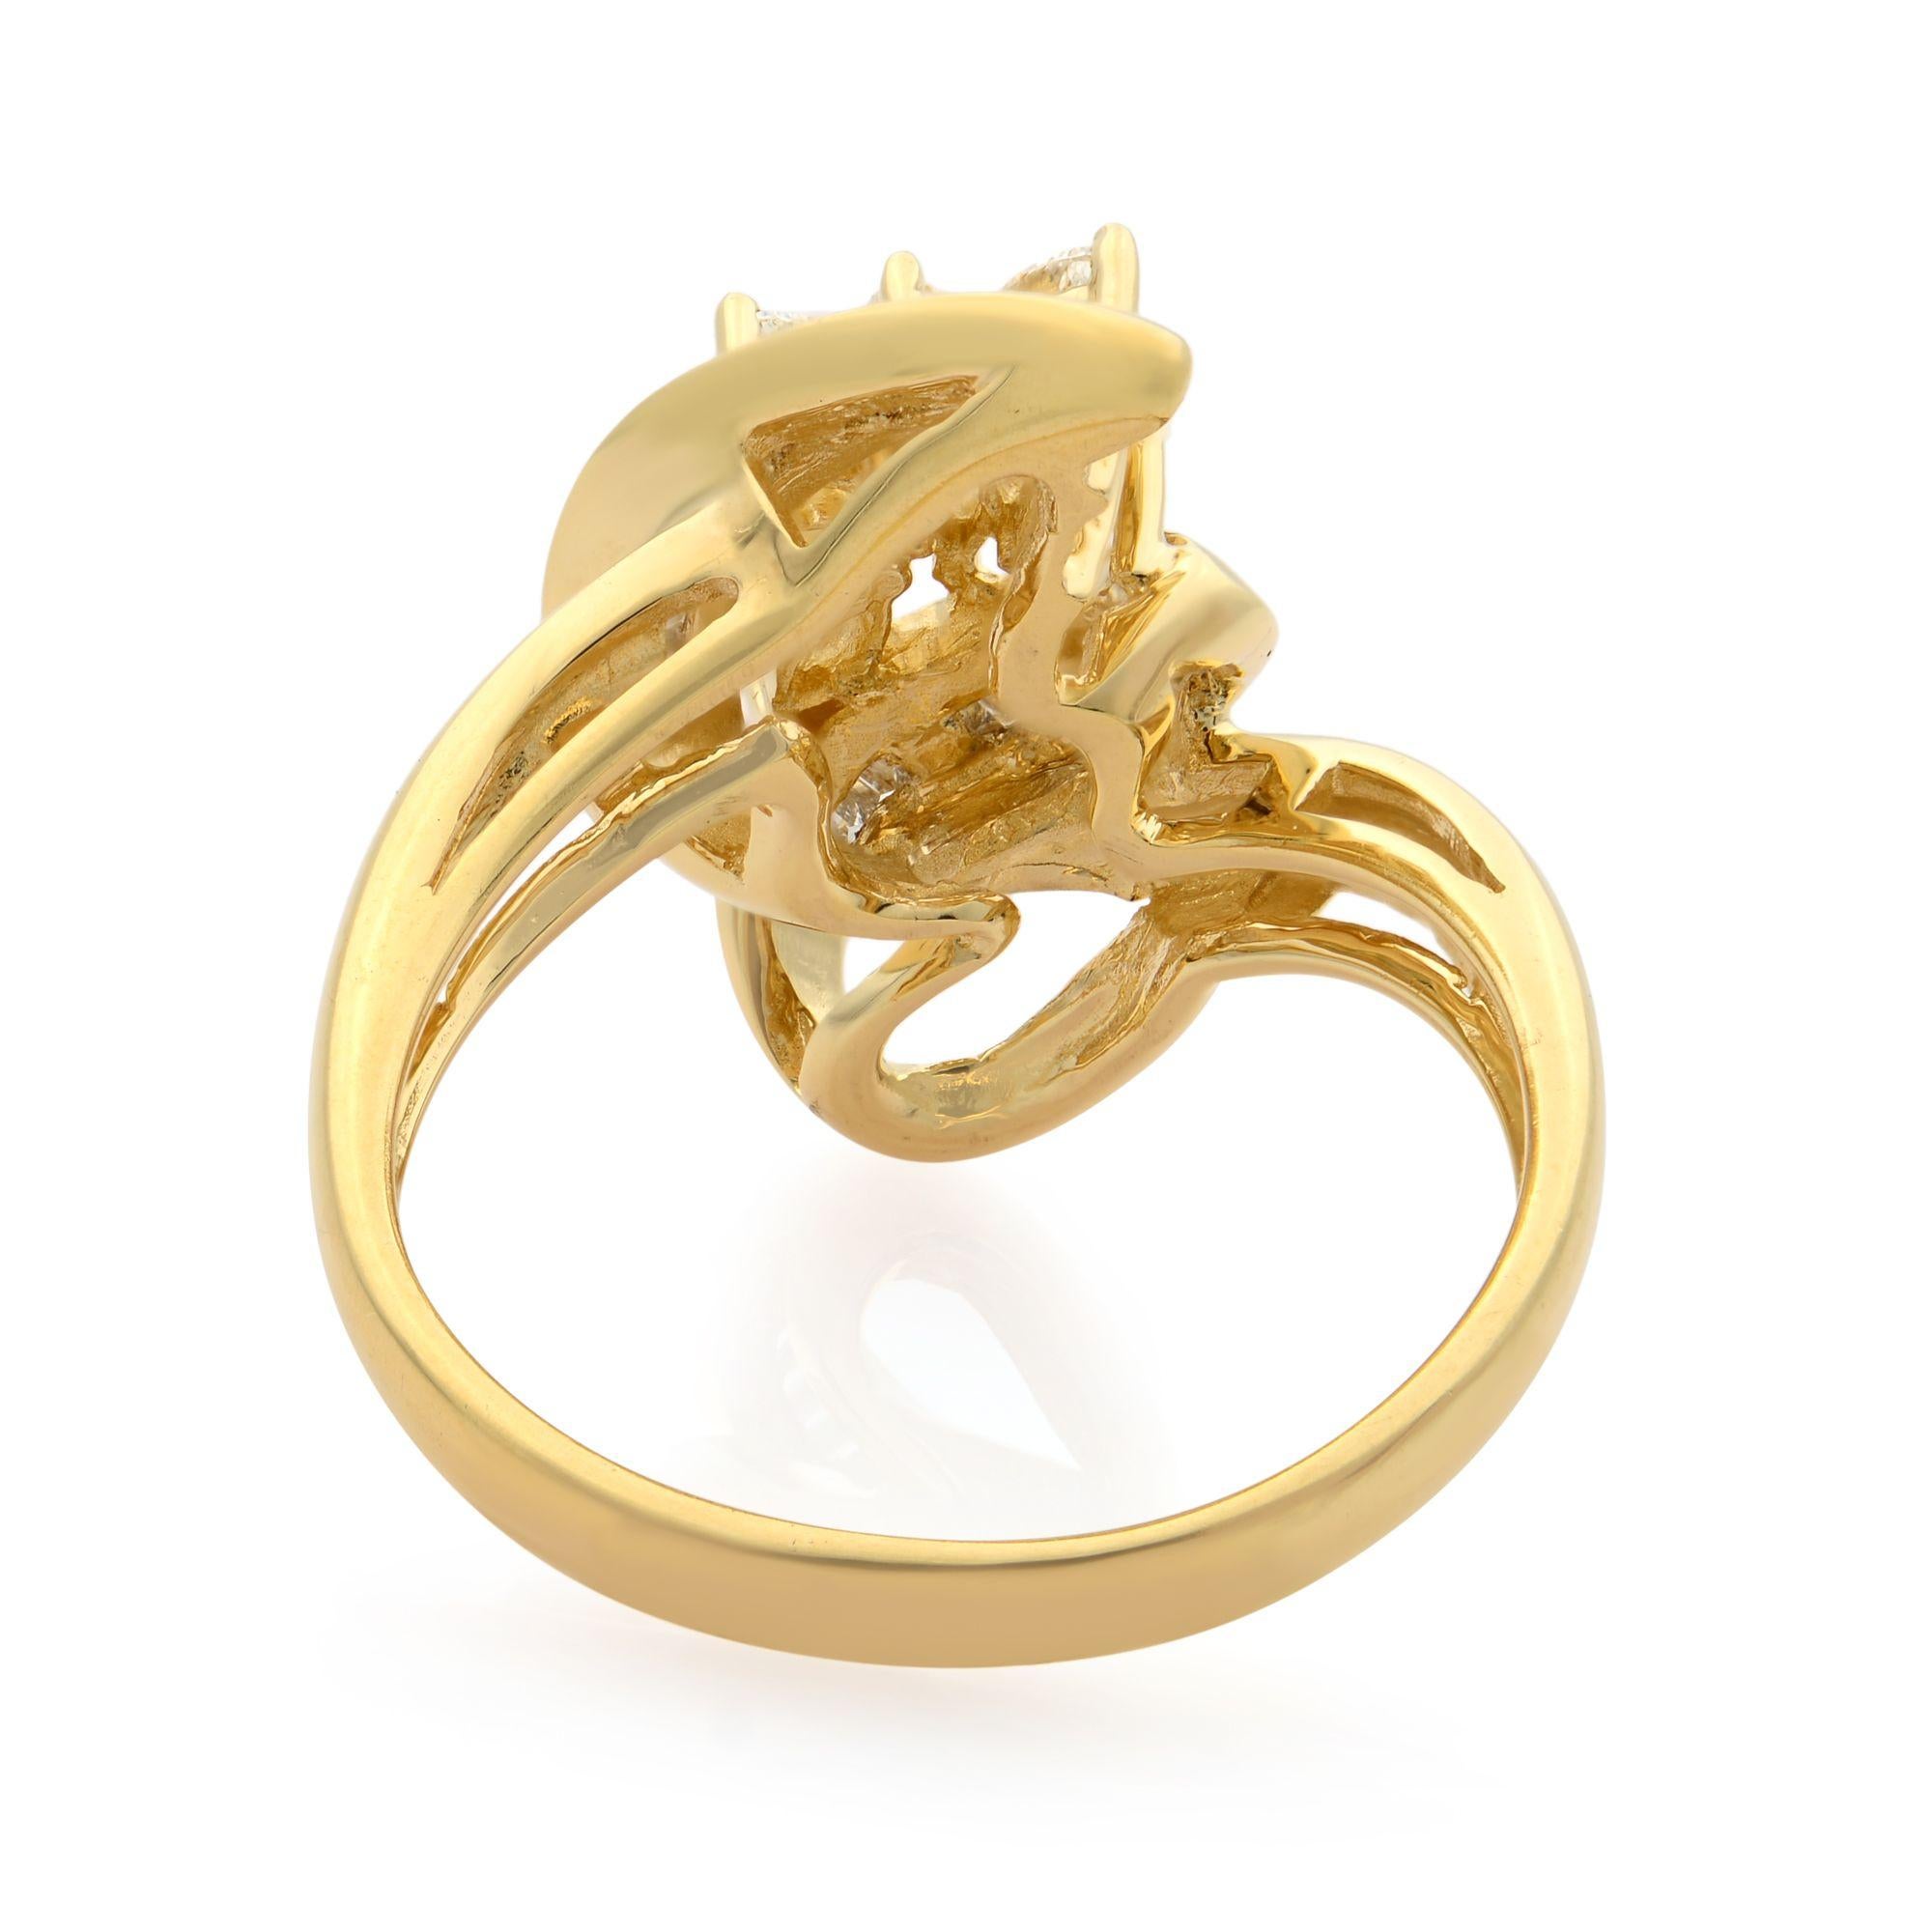 Rachel Koen 14K Yellow Gold Marquise and Baguette Diamonds Cocktail Ring 0.75cts In Excellent Condition For Sale In New York, NY